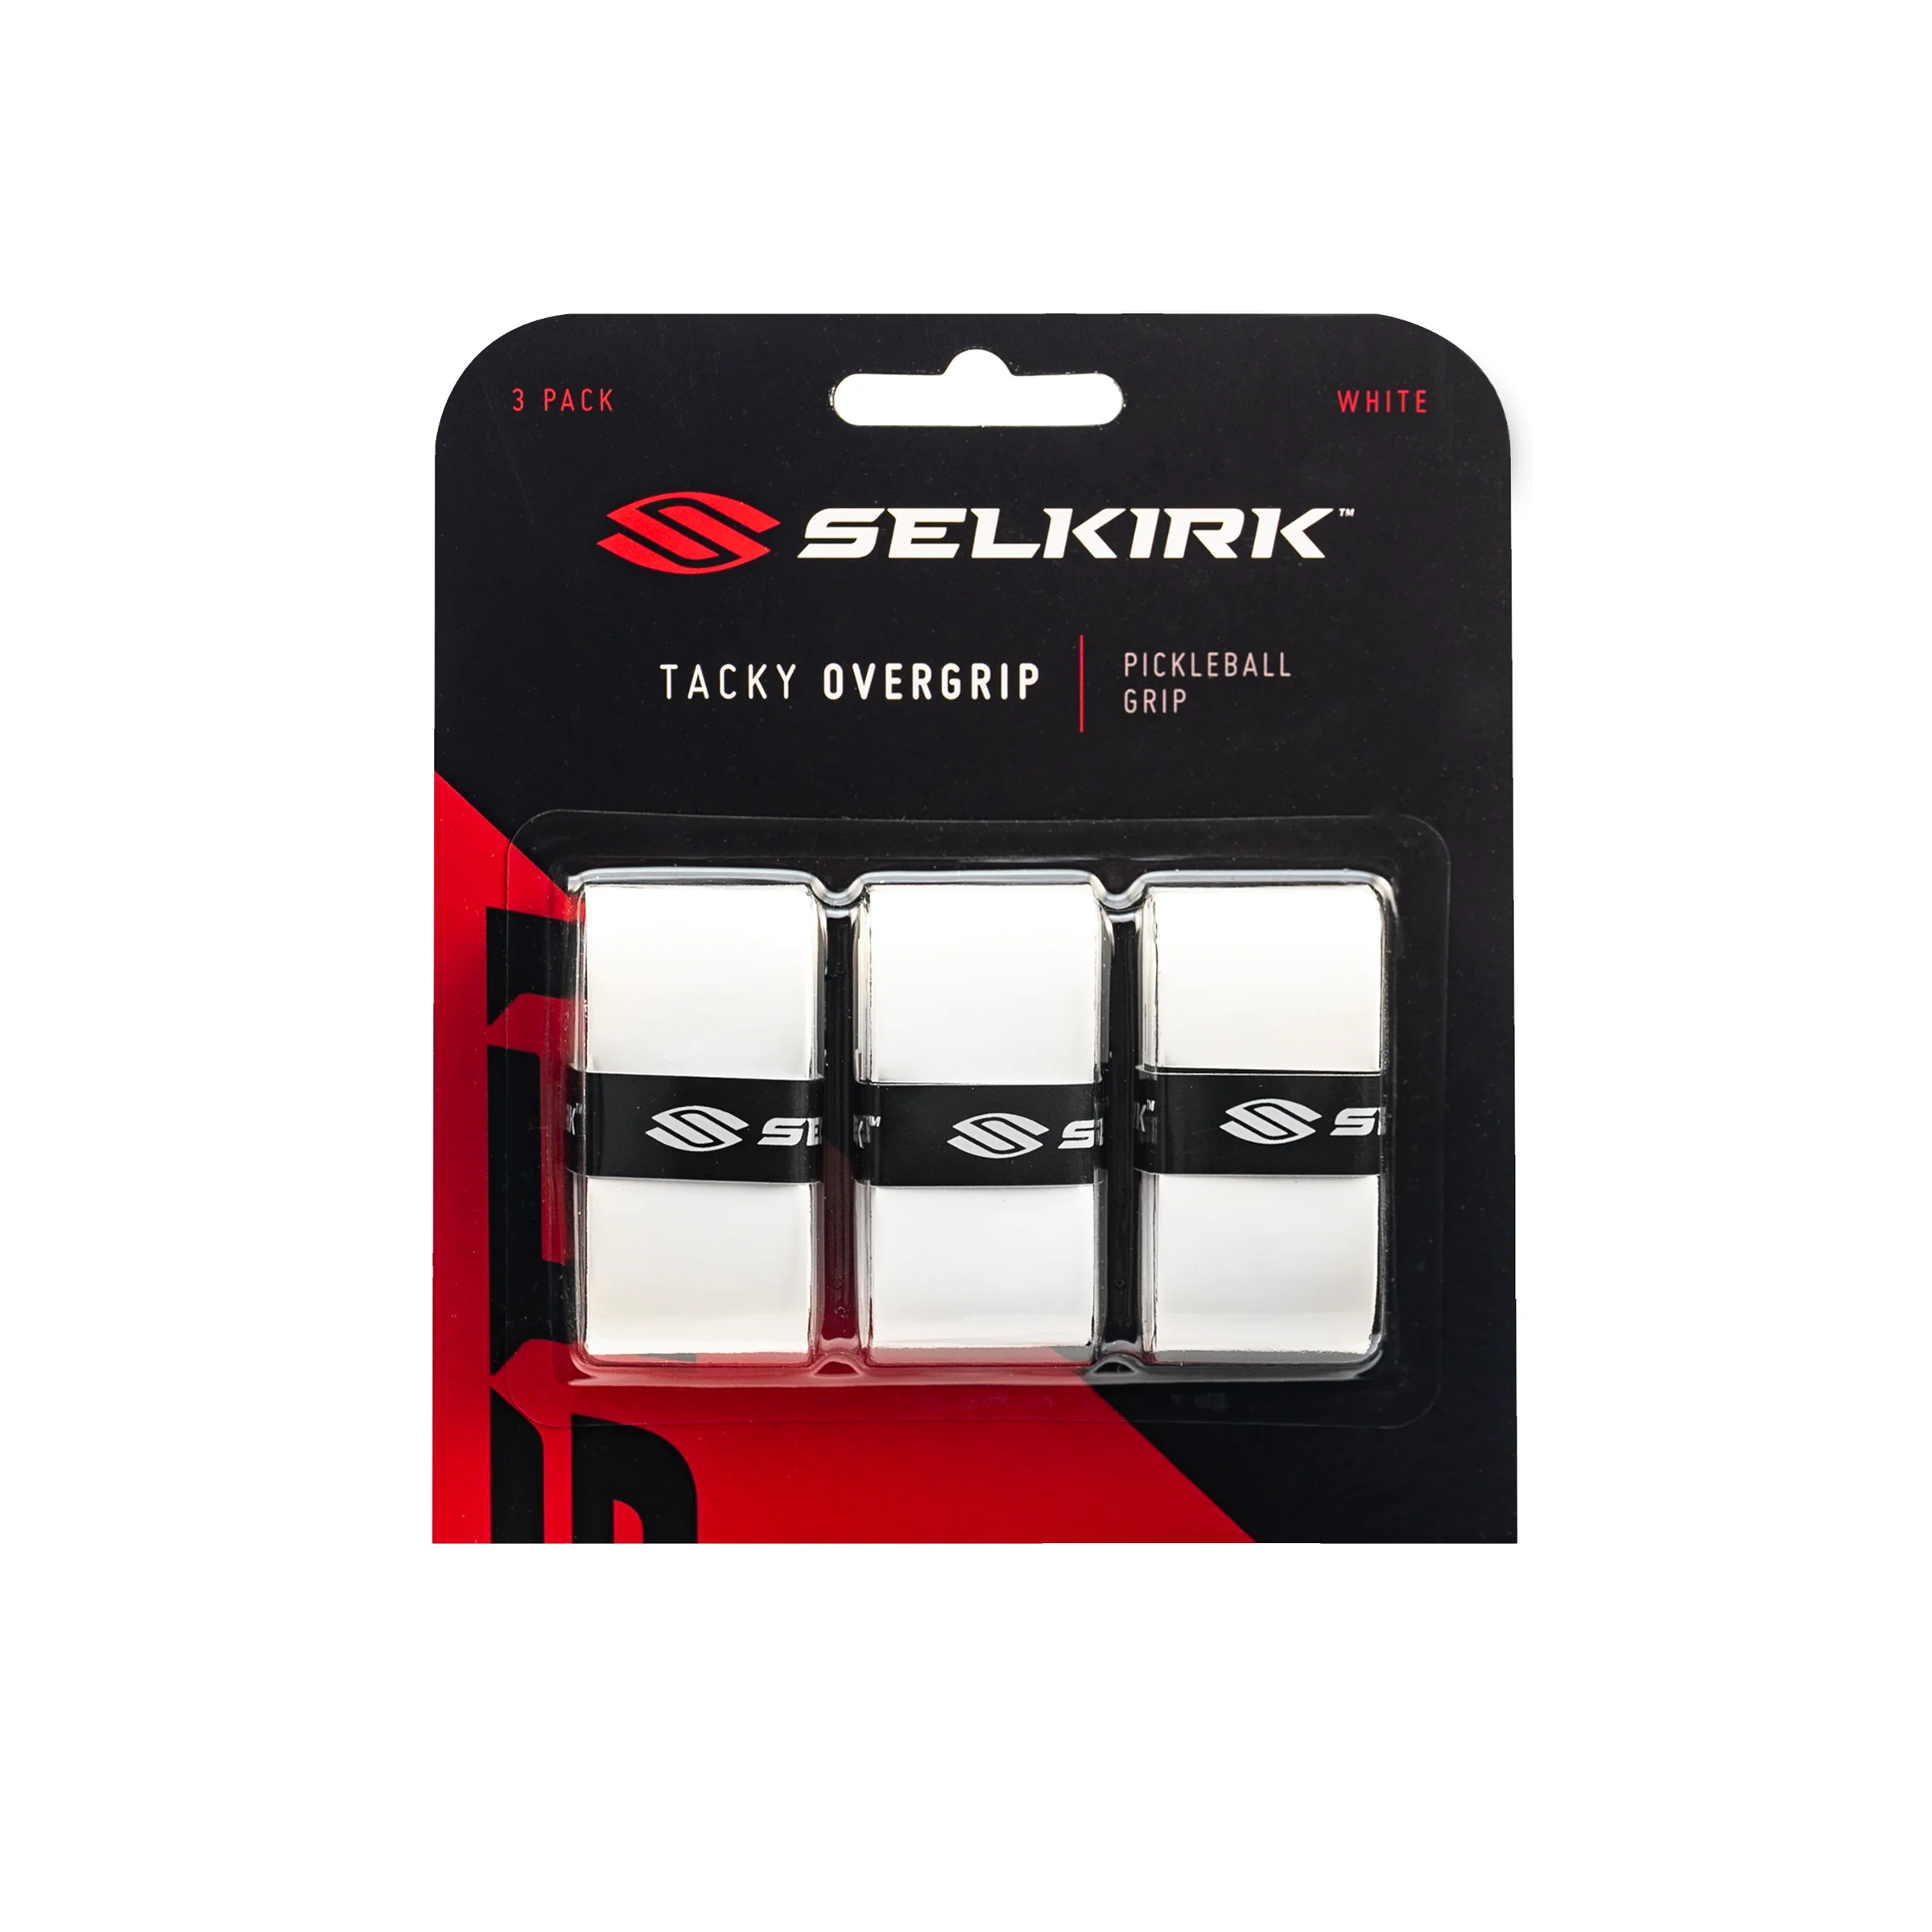 Selkirk Tacky Overgip (3-Pack) - White